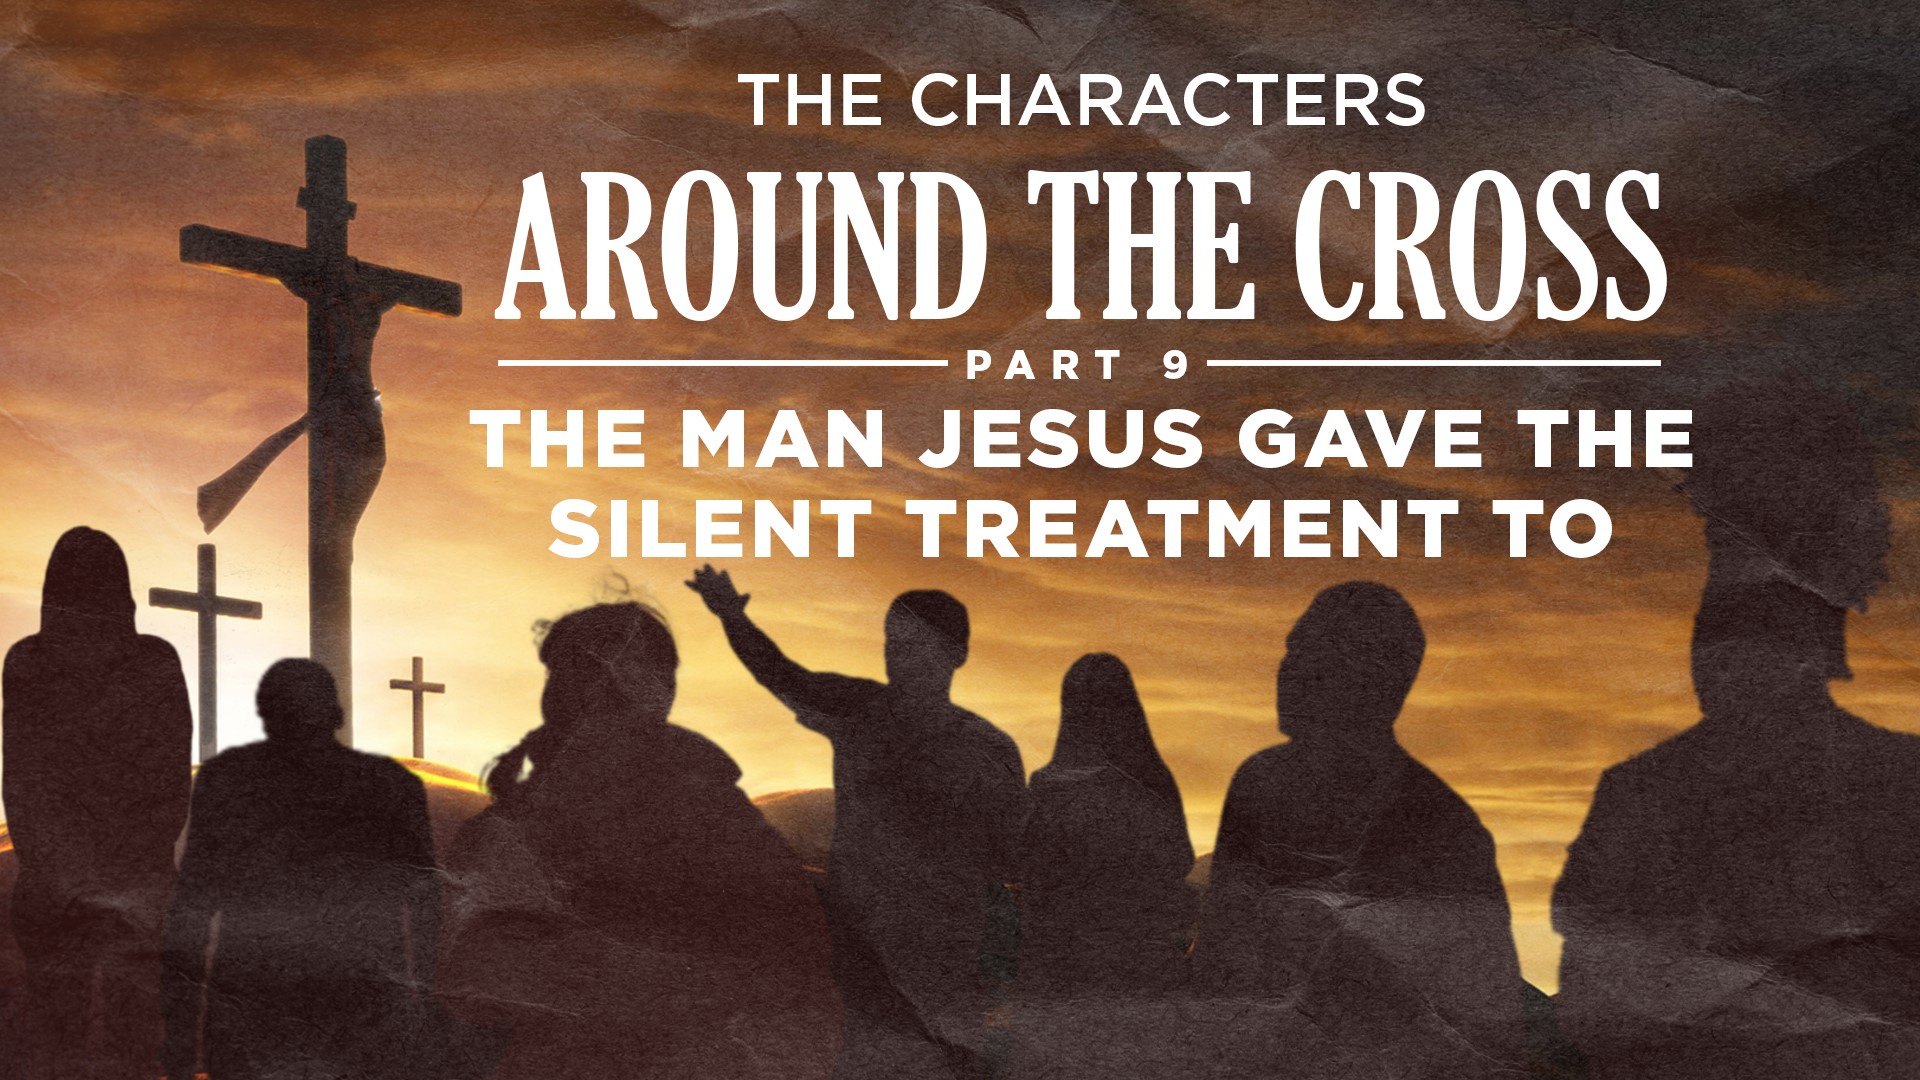 Part 9 - The man Jesus gave the silent treatment to